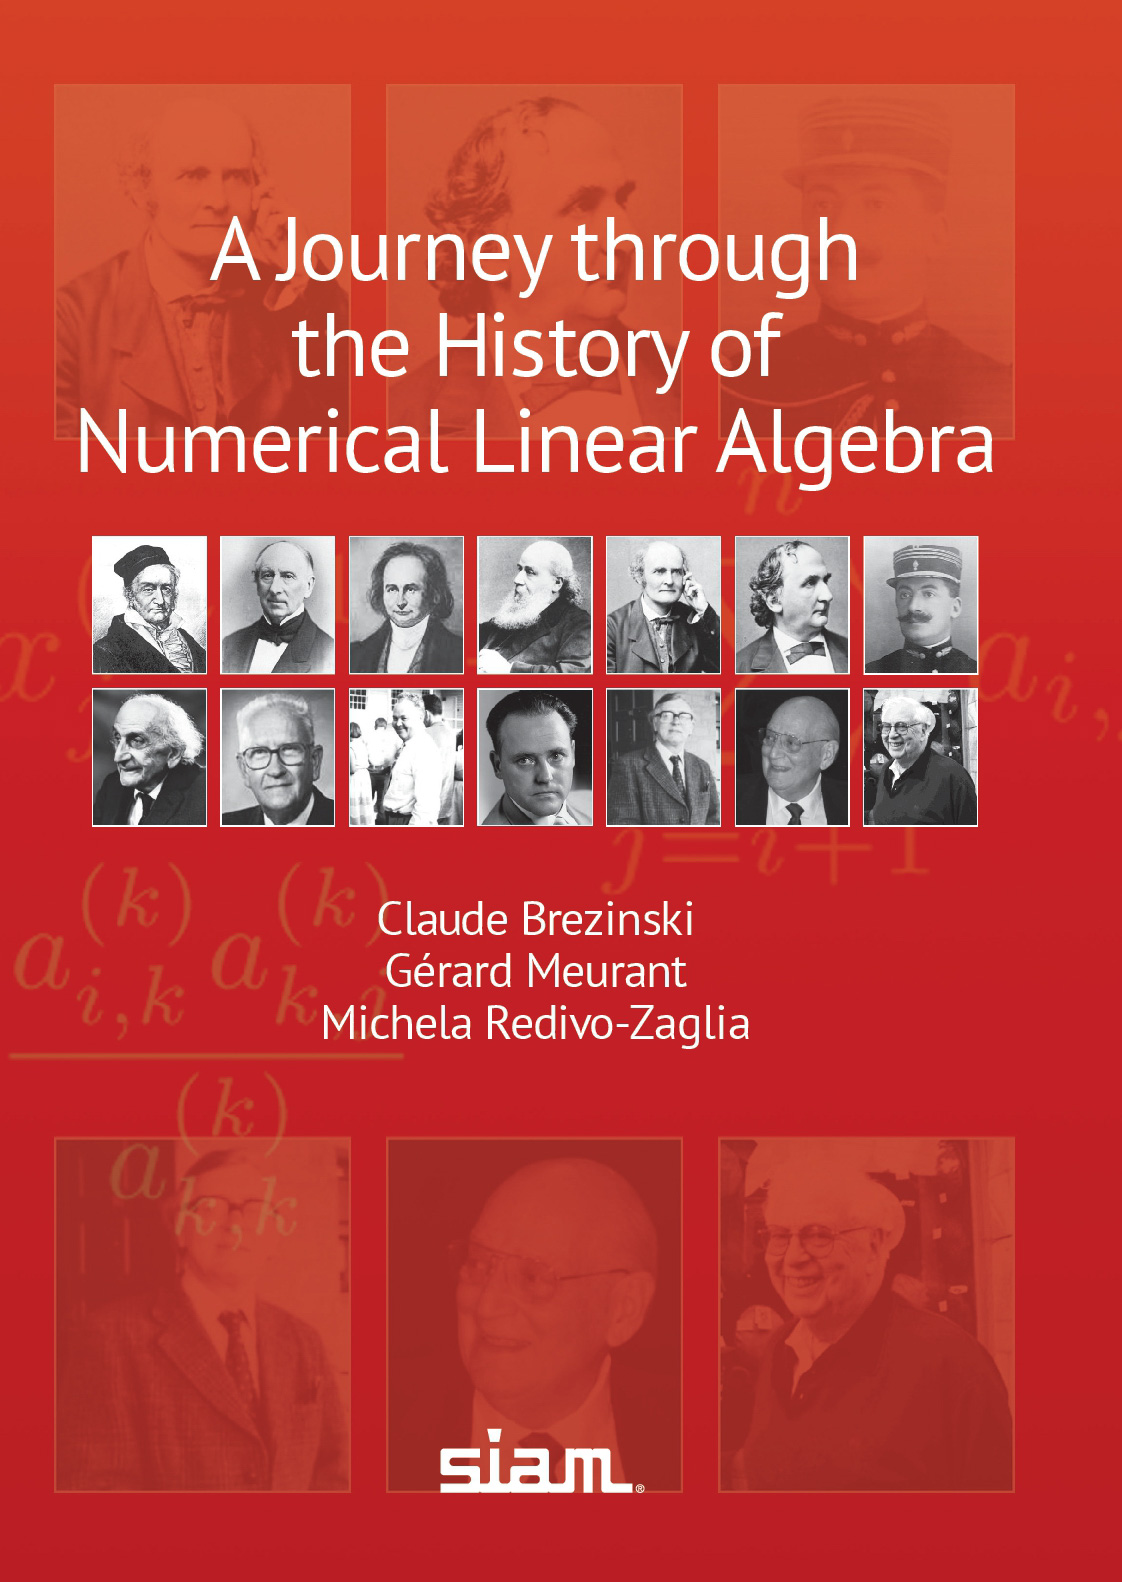 a journey through the history of numerical linear algebra pdf